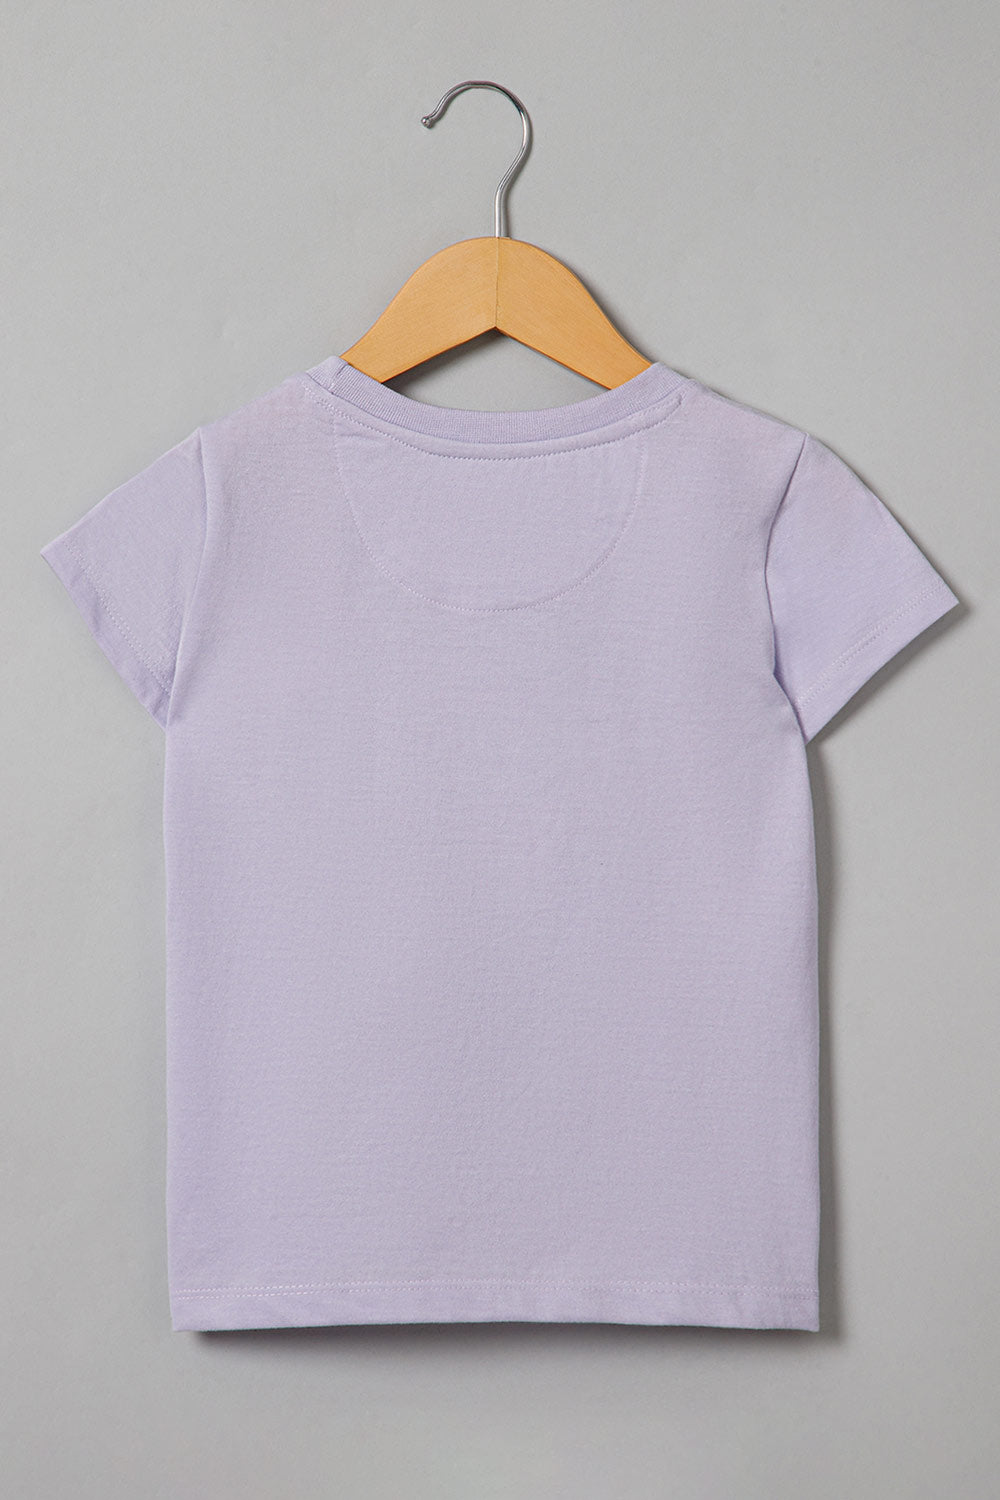 The Young Future Girls T-shirt - Lavender - GT08